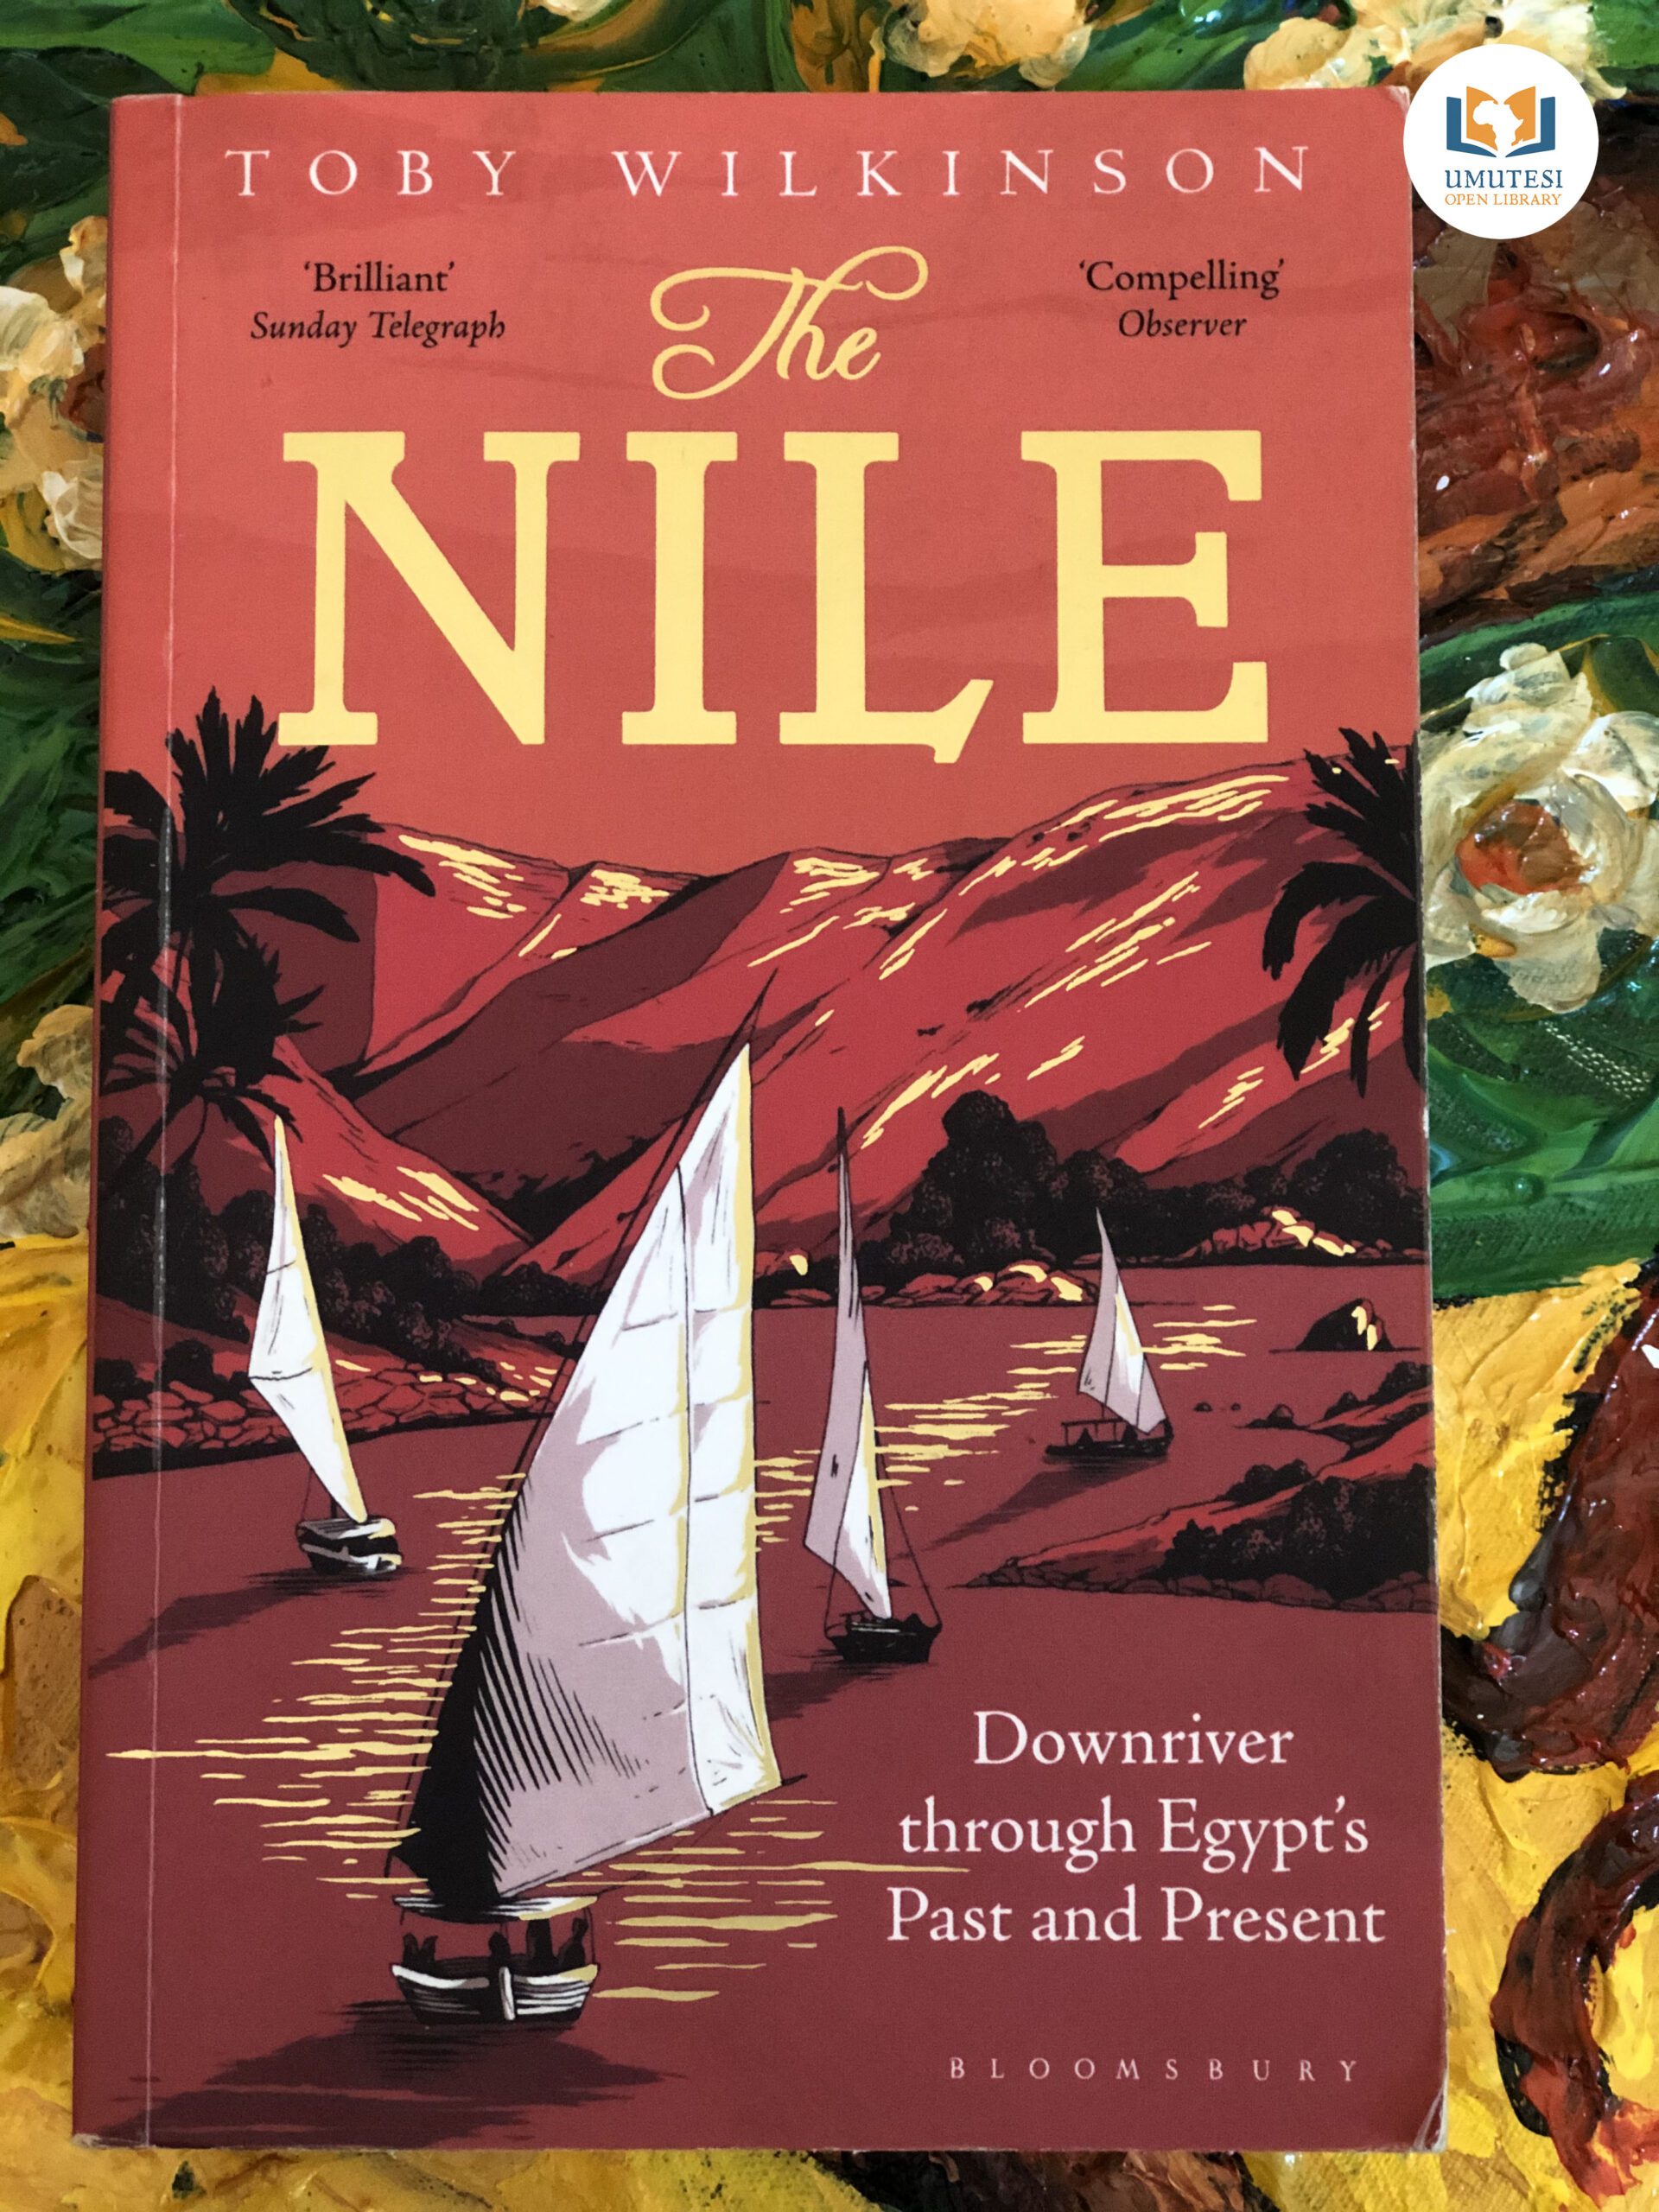 The Nile by Toby Wilkinson